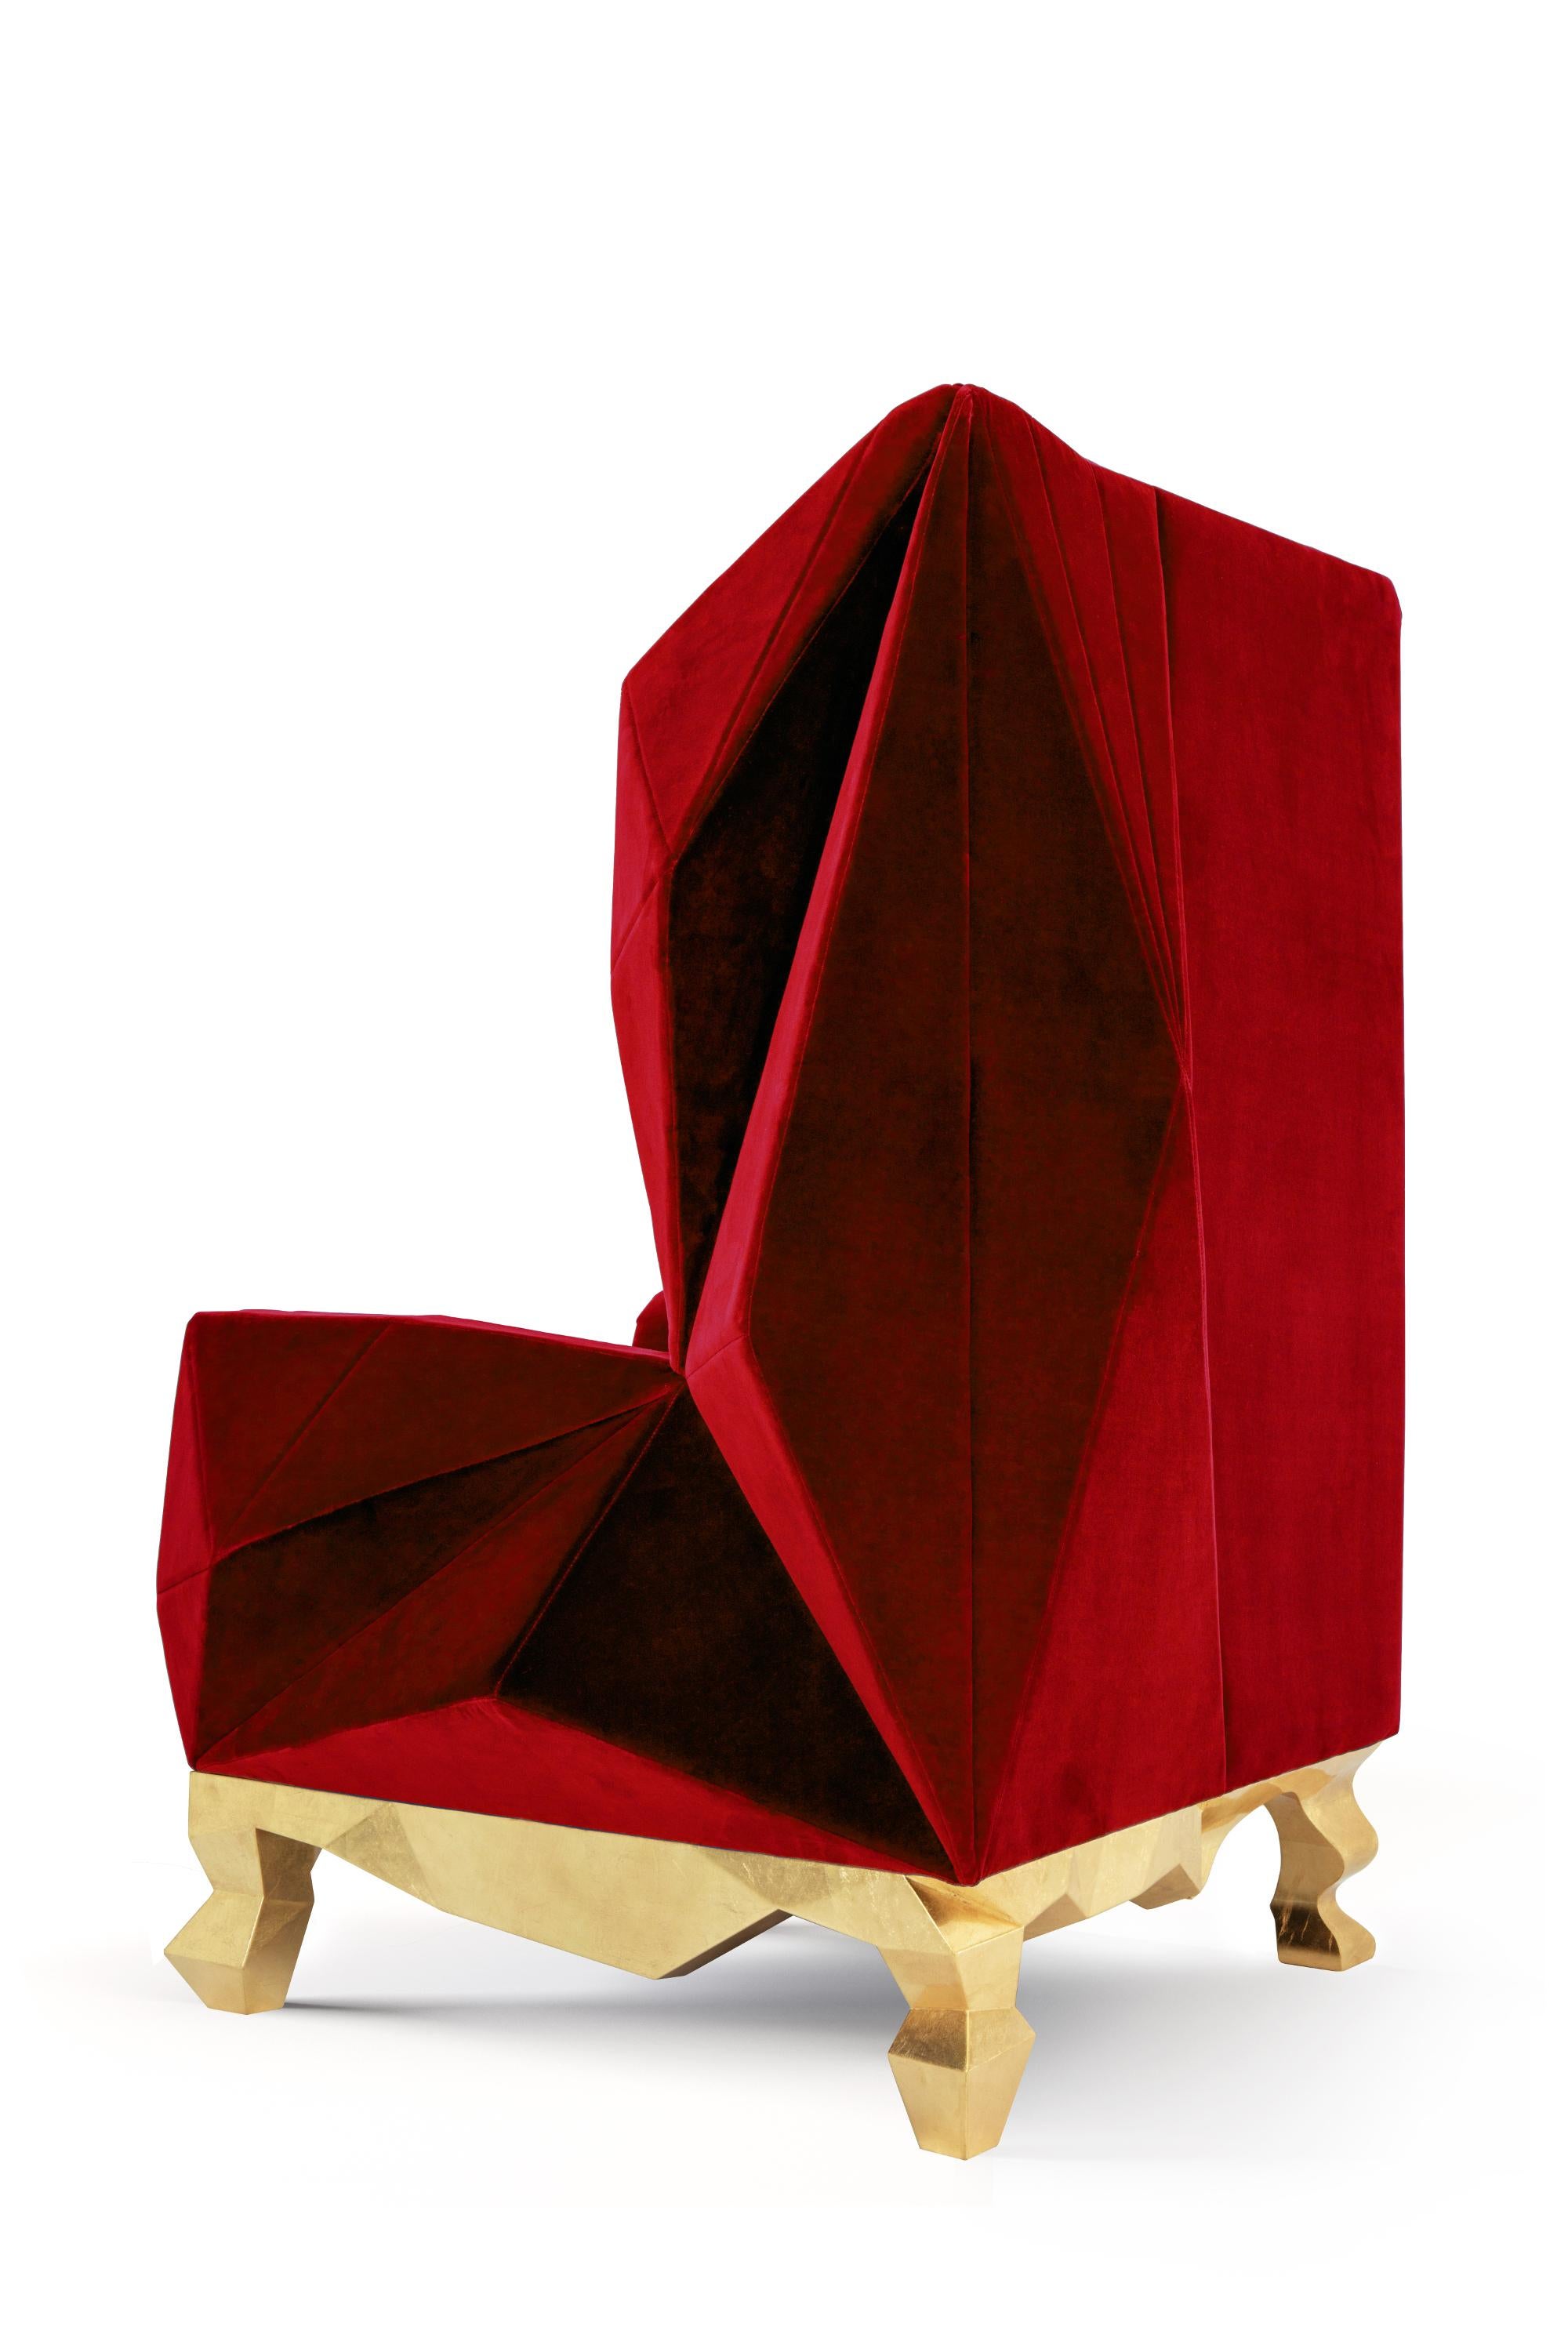 Velvet Ruby Rockchair by Royal Stranger
Dimensions: Width 98cm, height 135cm, depth 99cm
Different upholstery colors and finishes are available. Brass, copper or stainless steel in polished or brushed finish.
Materials: velvet on the top of the gold